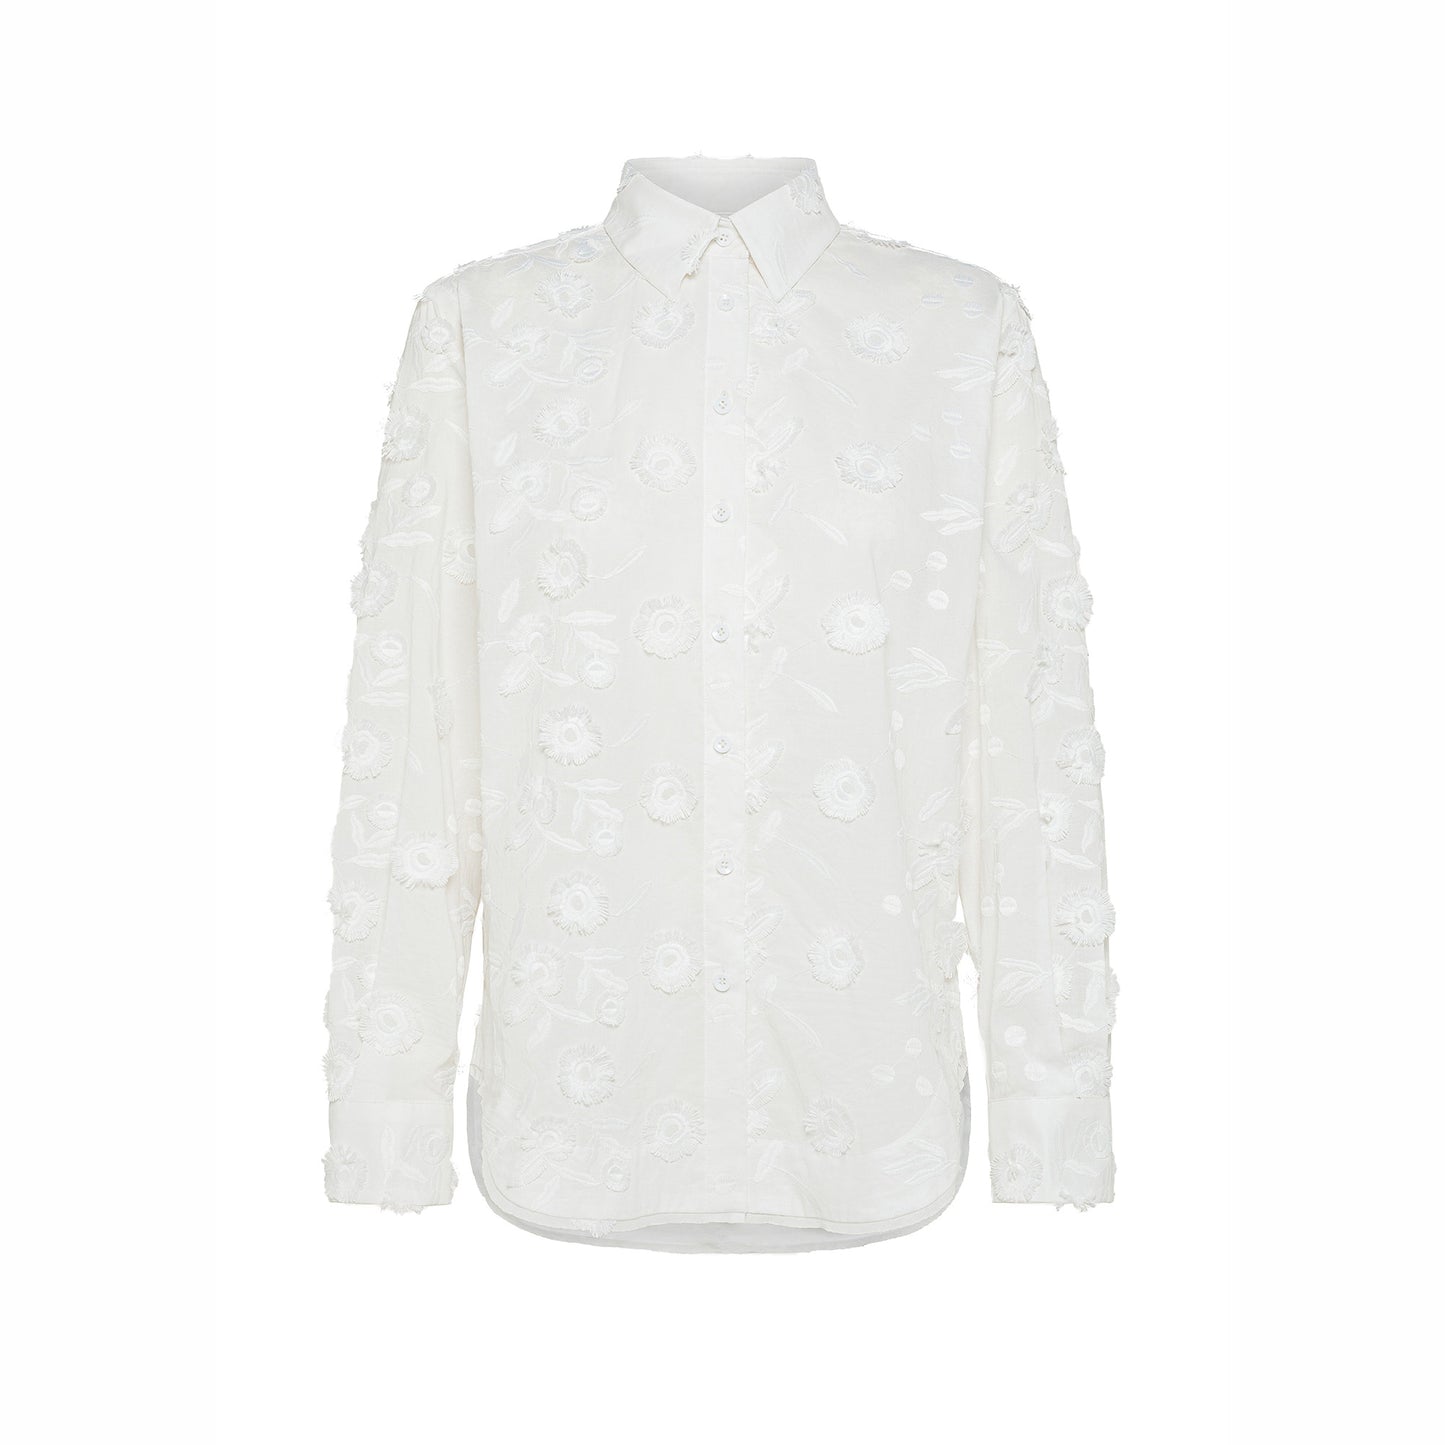 Embroidered Viole Blouse in Cream